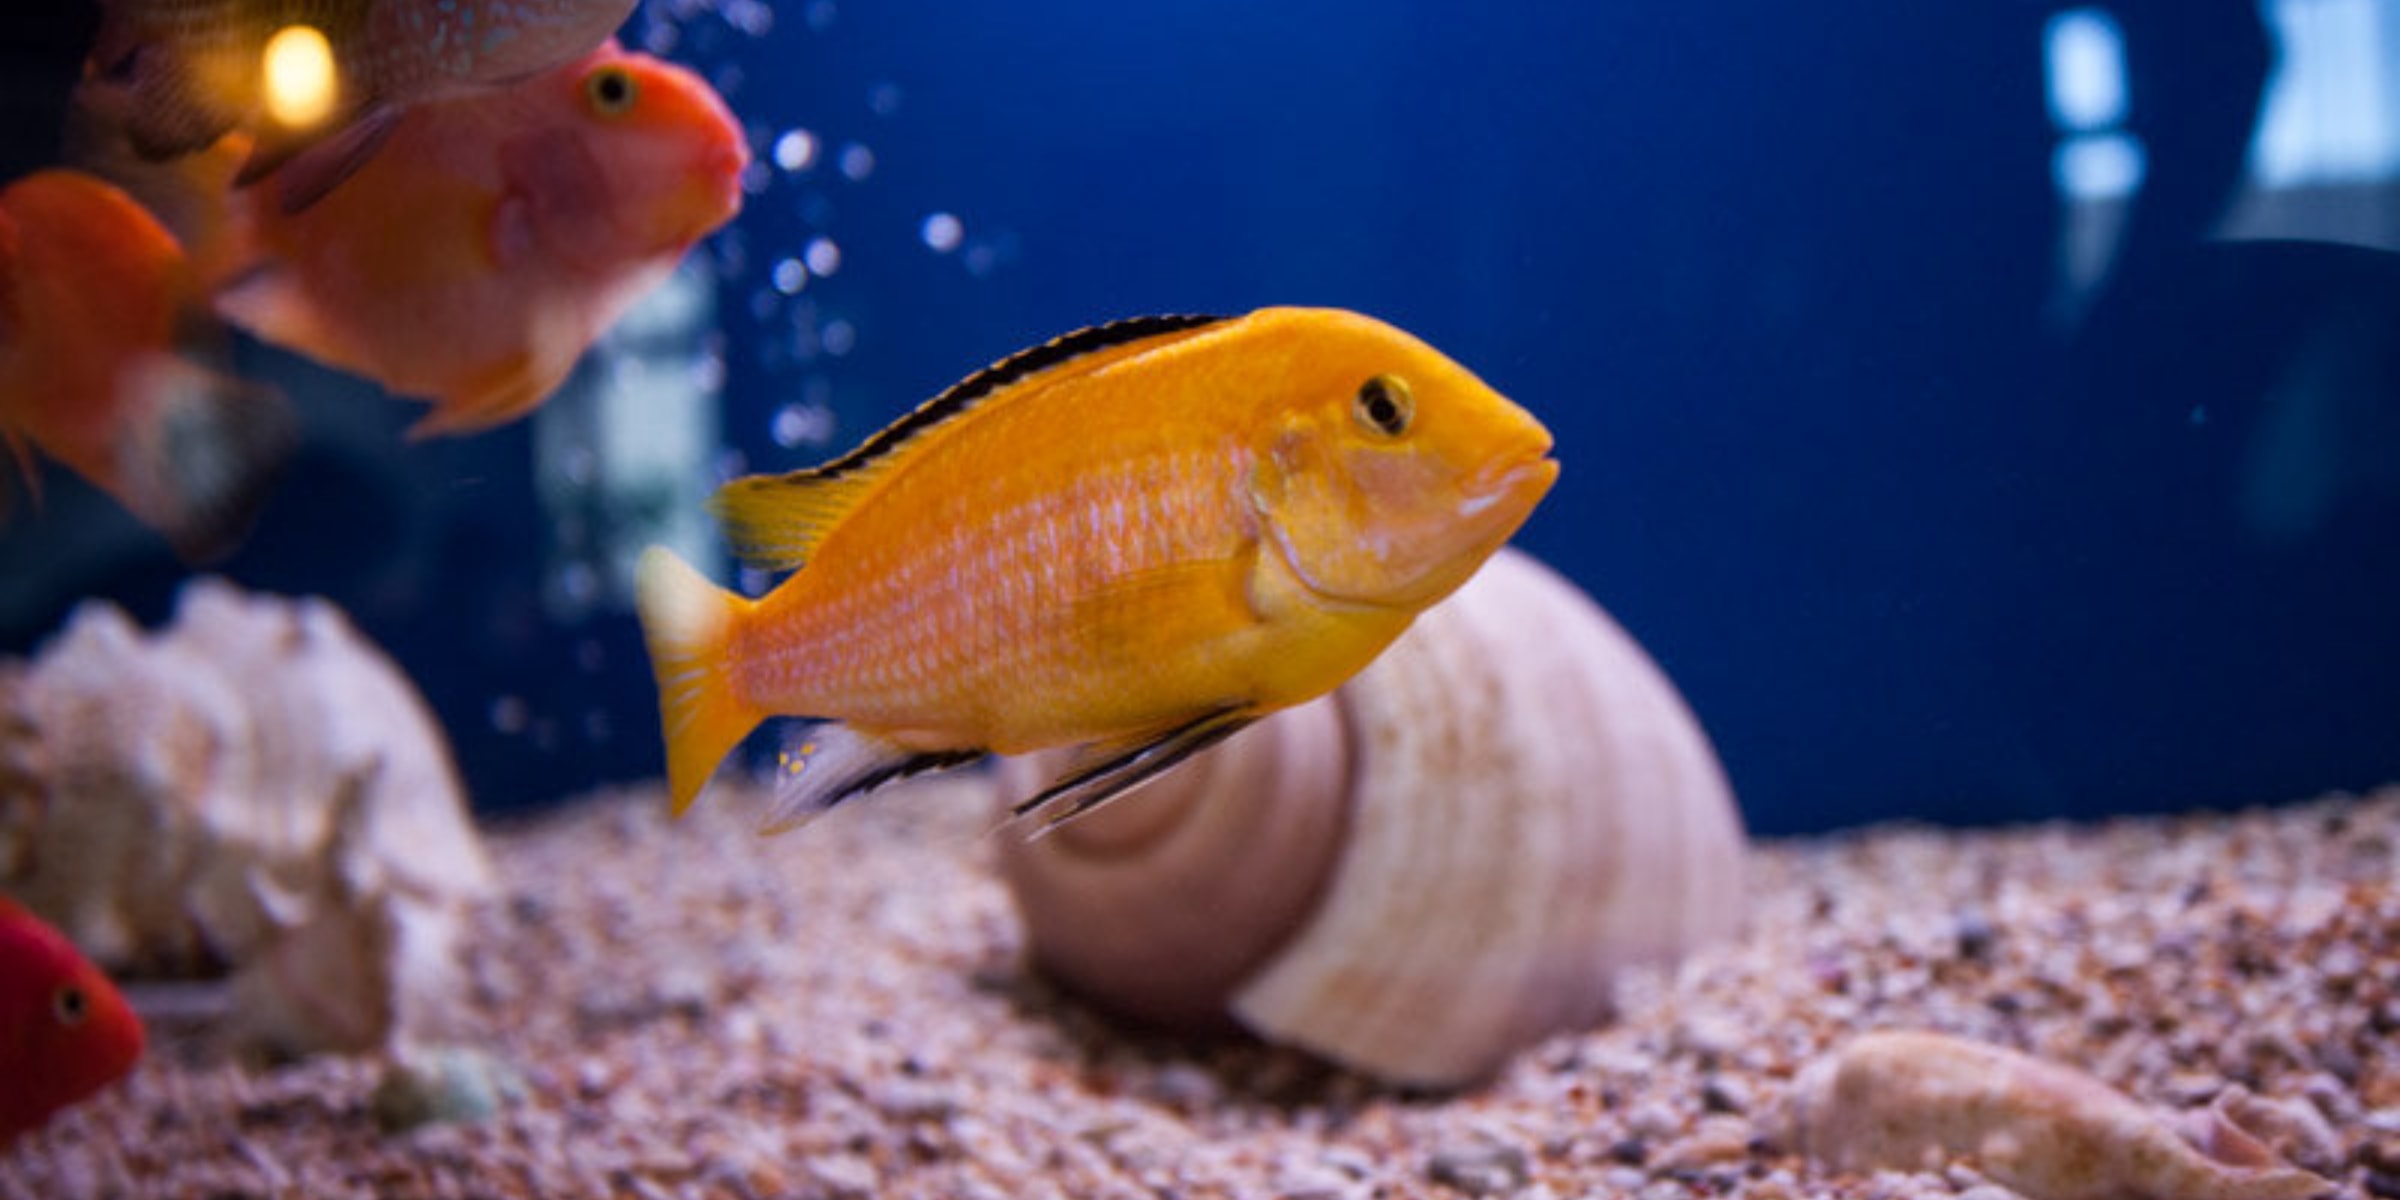 Aquarium Maintenance - Livestock replenishment, décor changes, water changes, cleaning and free call outs